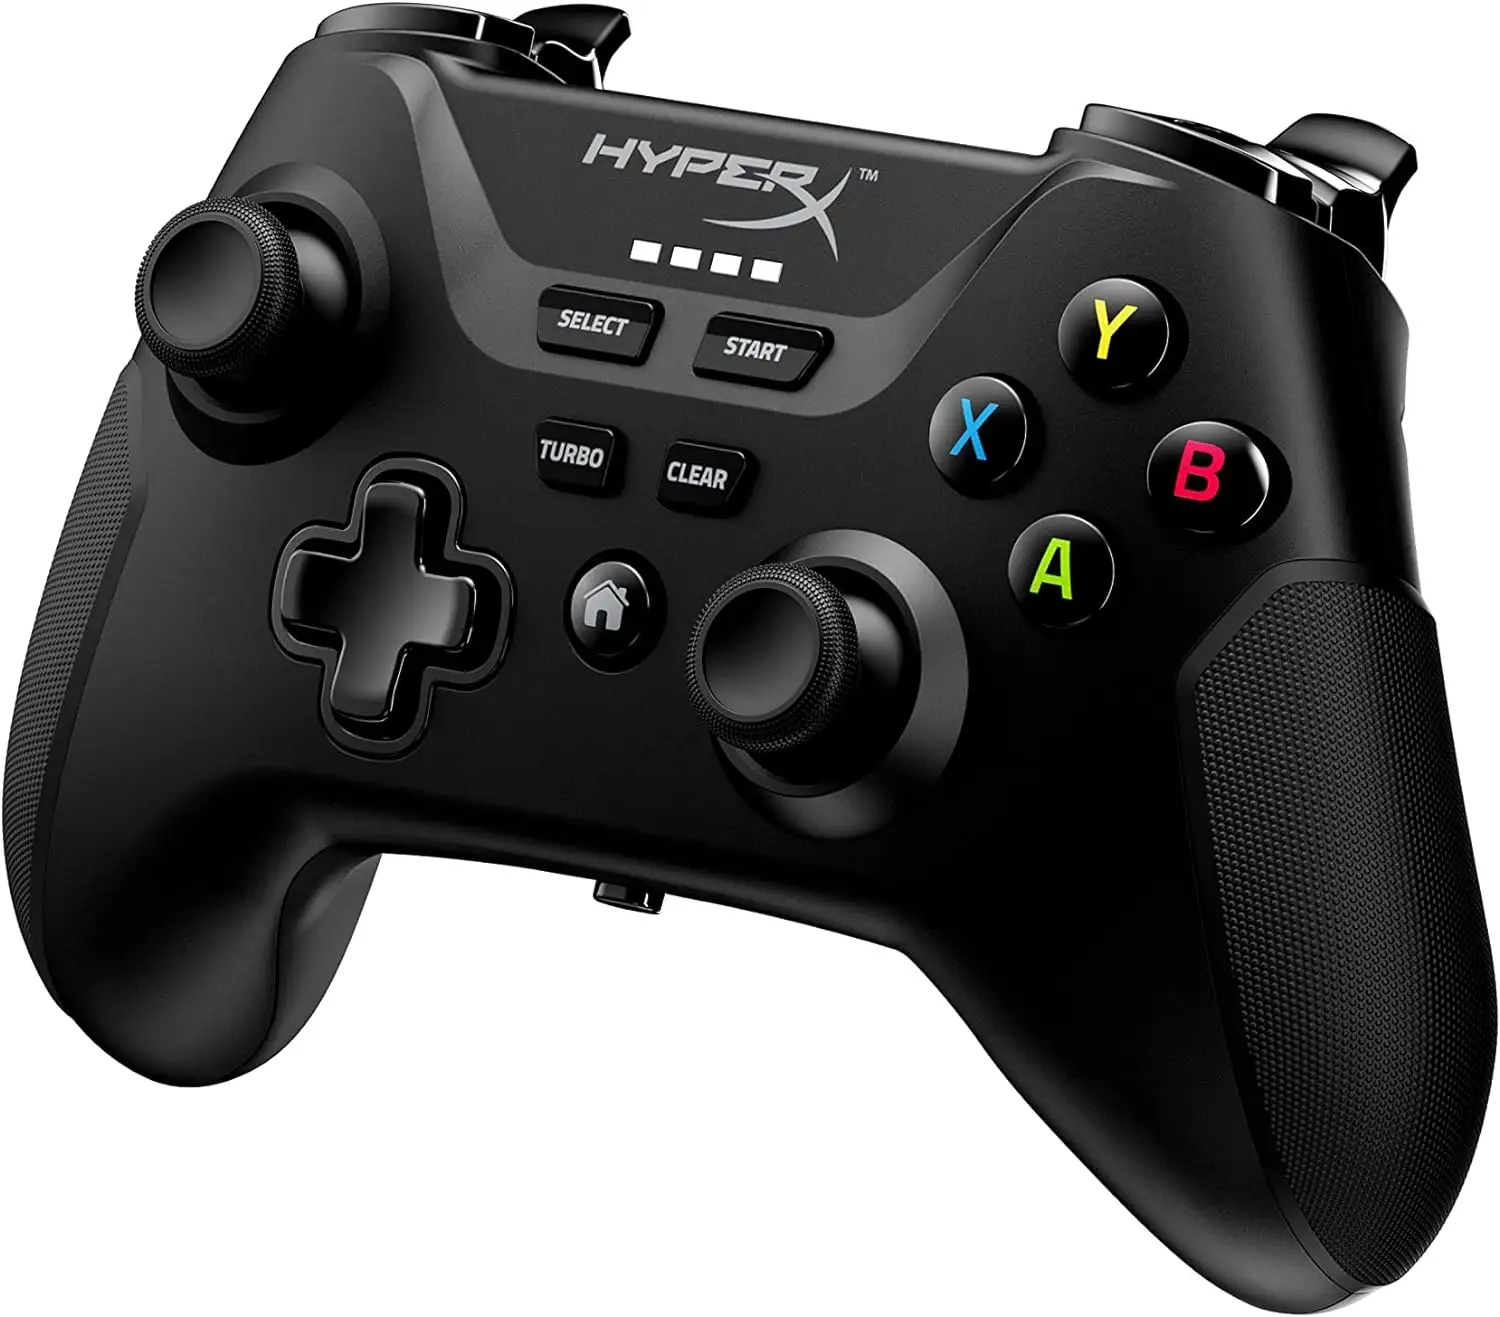 HyperX Clutch 516L8AA for Android and PC Bluetooth 2.4GHz Wireless USB-C to USB-A Wired Connection Phone Clip Gaming Controller